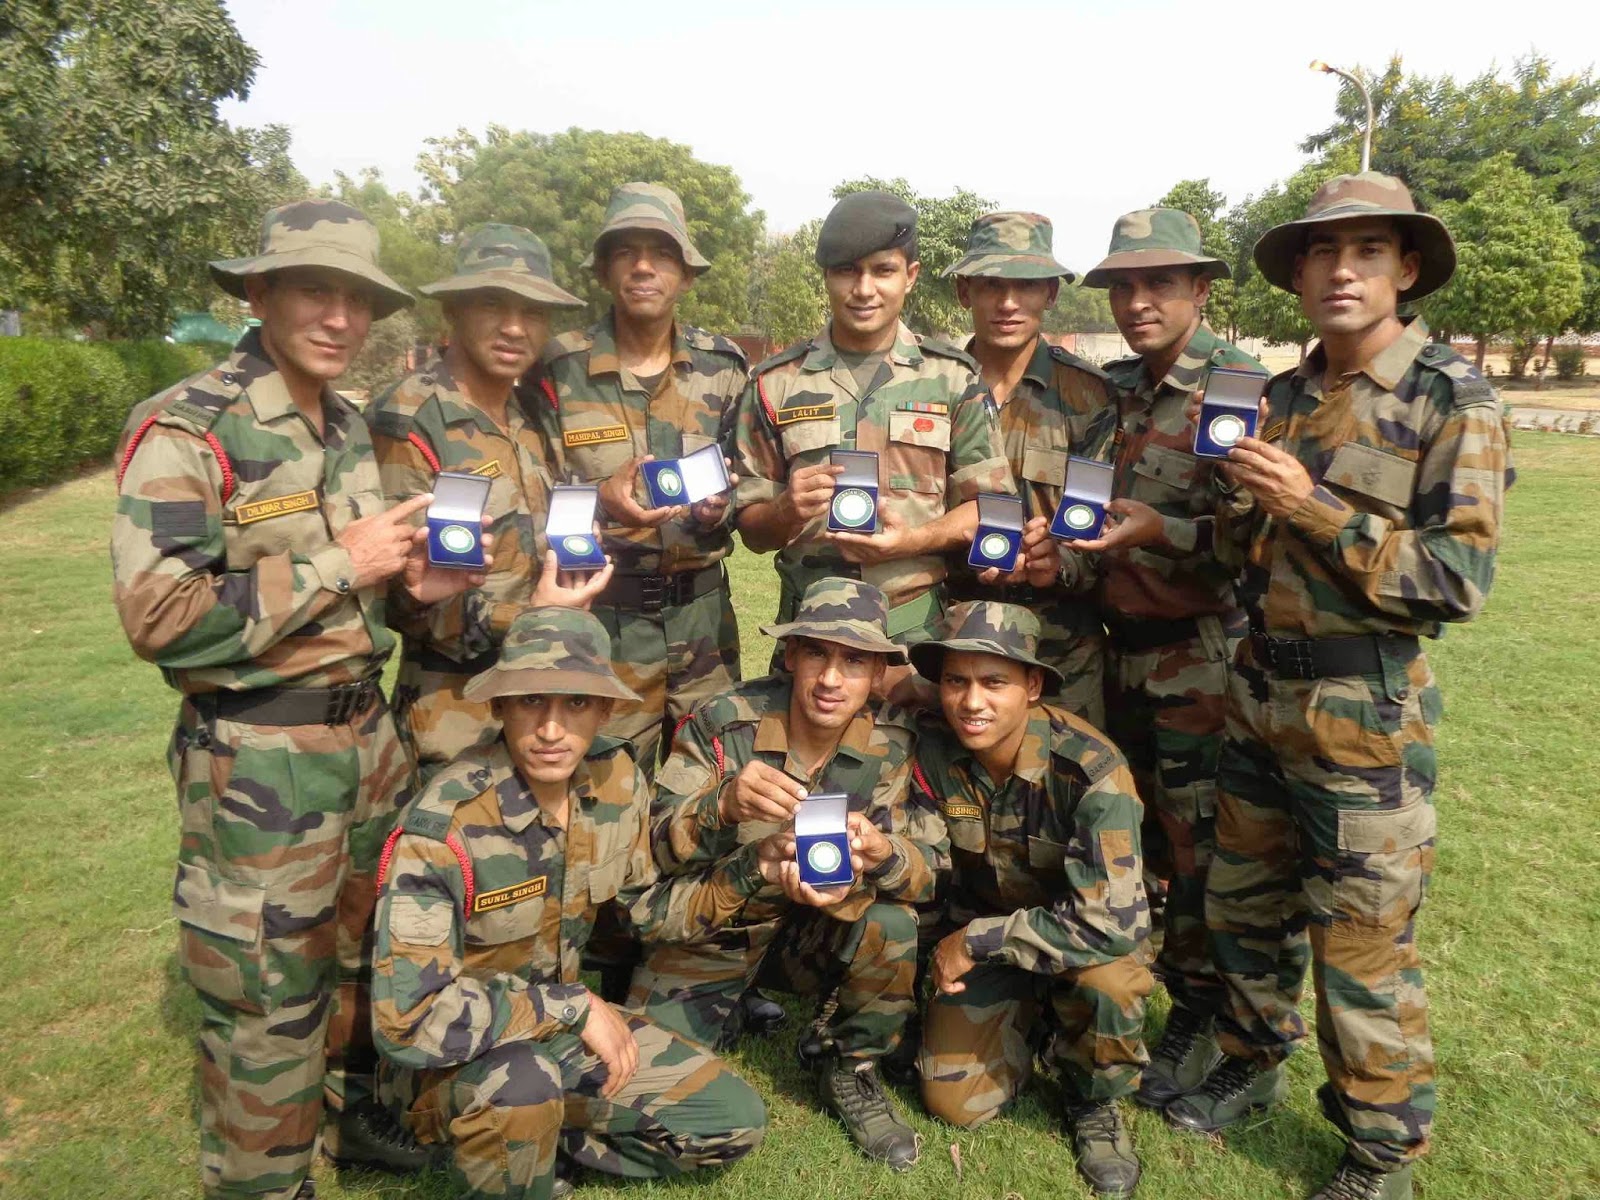 Indian Army Team Wins Gold Medal in Cambrian Patrol, Most Grueling Army Exercise in the WorldIndian Army Team Wins Gold Medal in Cambrian Patrol, Most Grueling Army Exercise in the World